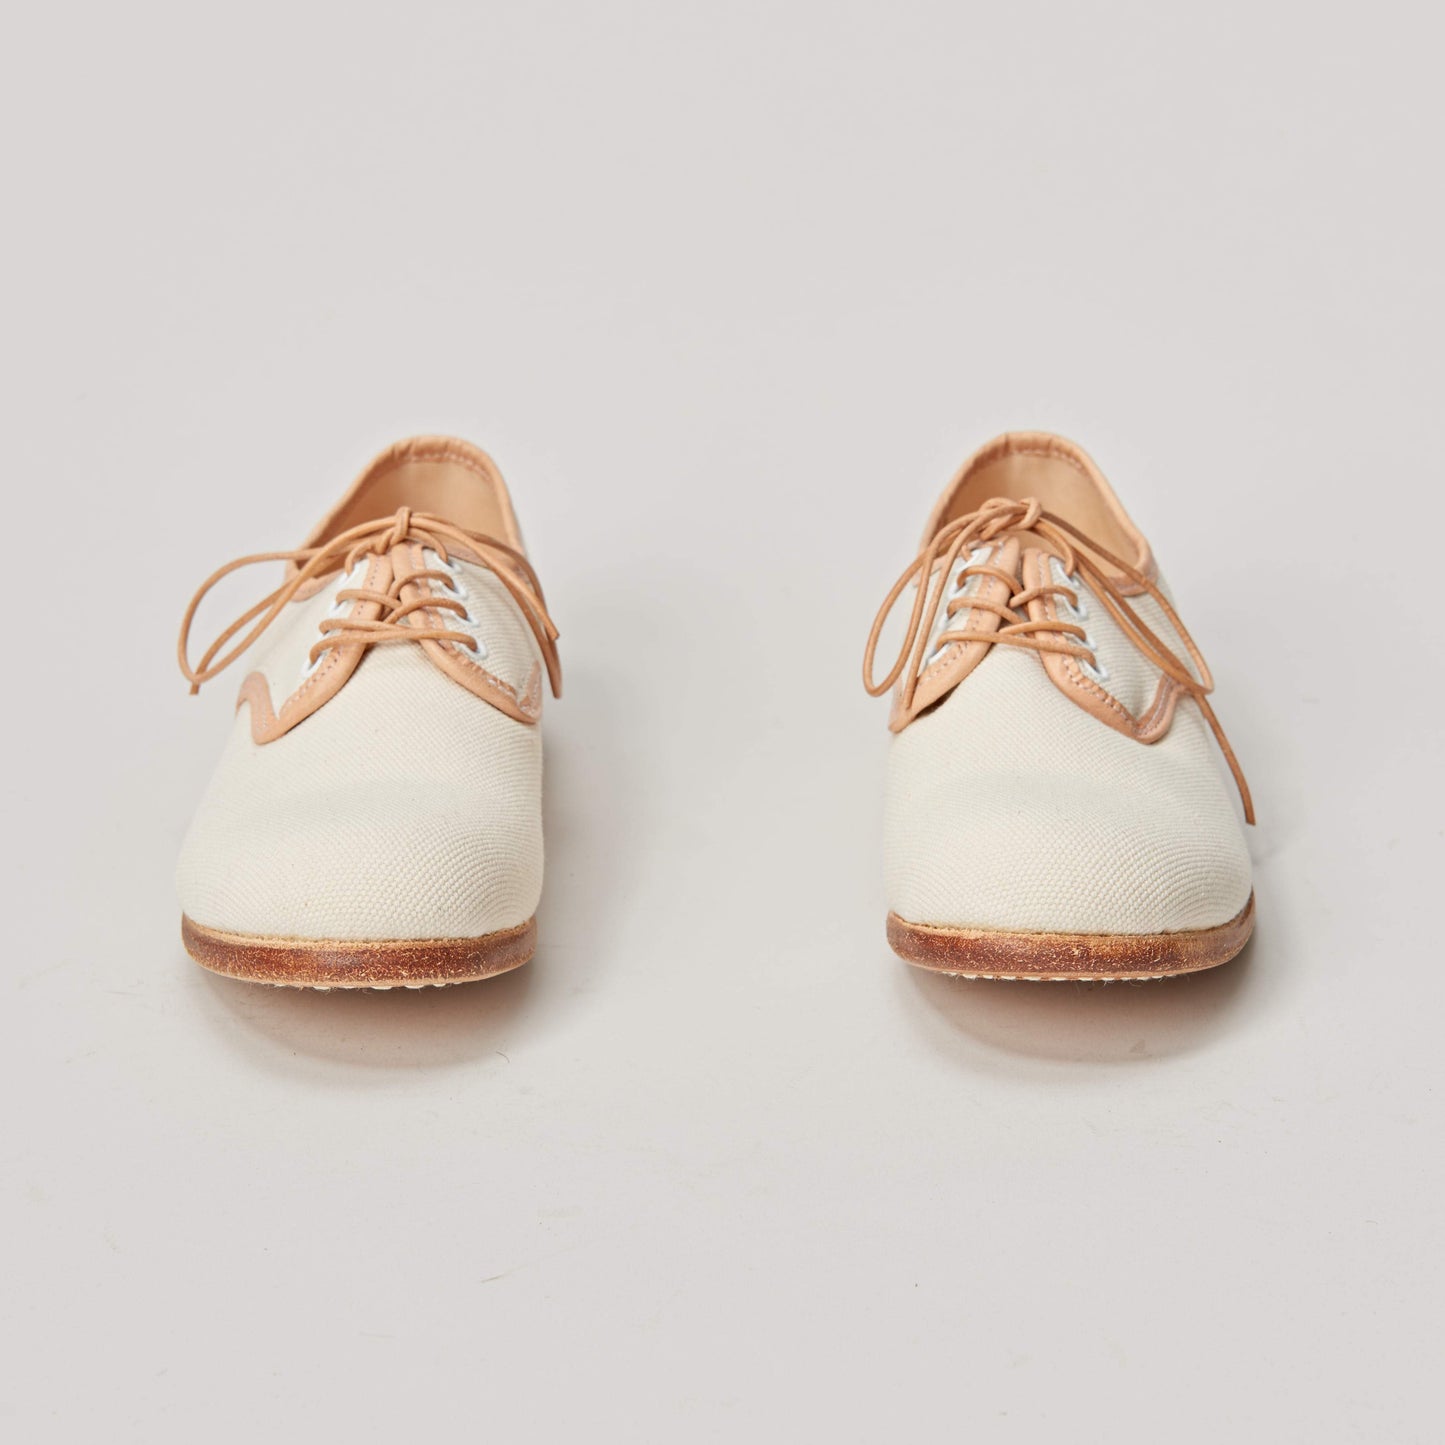 TATAMBA DERBY LACE UP CANVAS SHOE - NATURAL